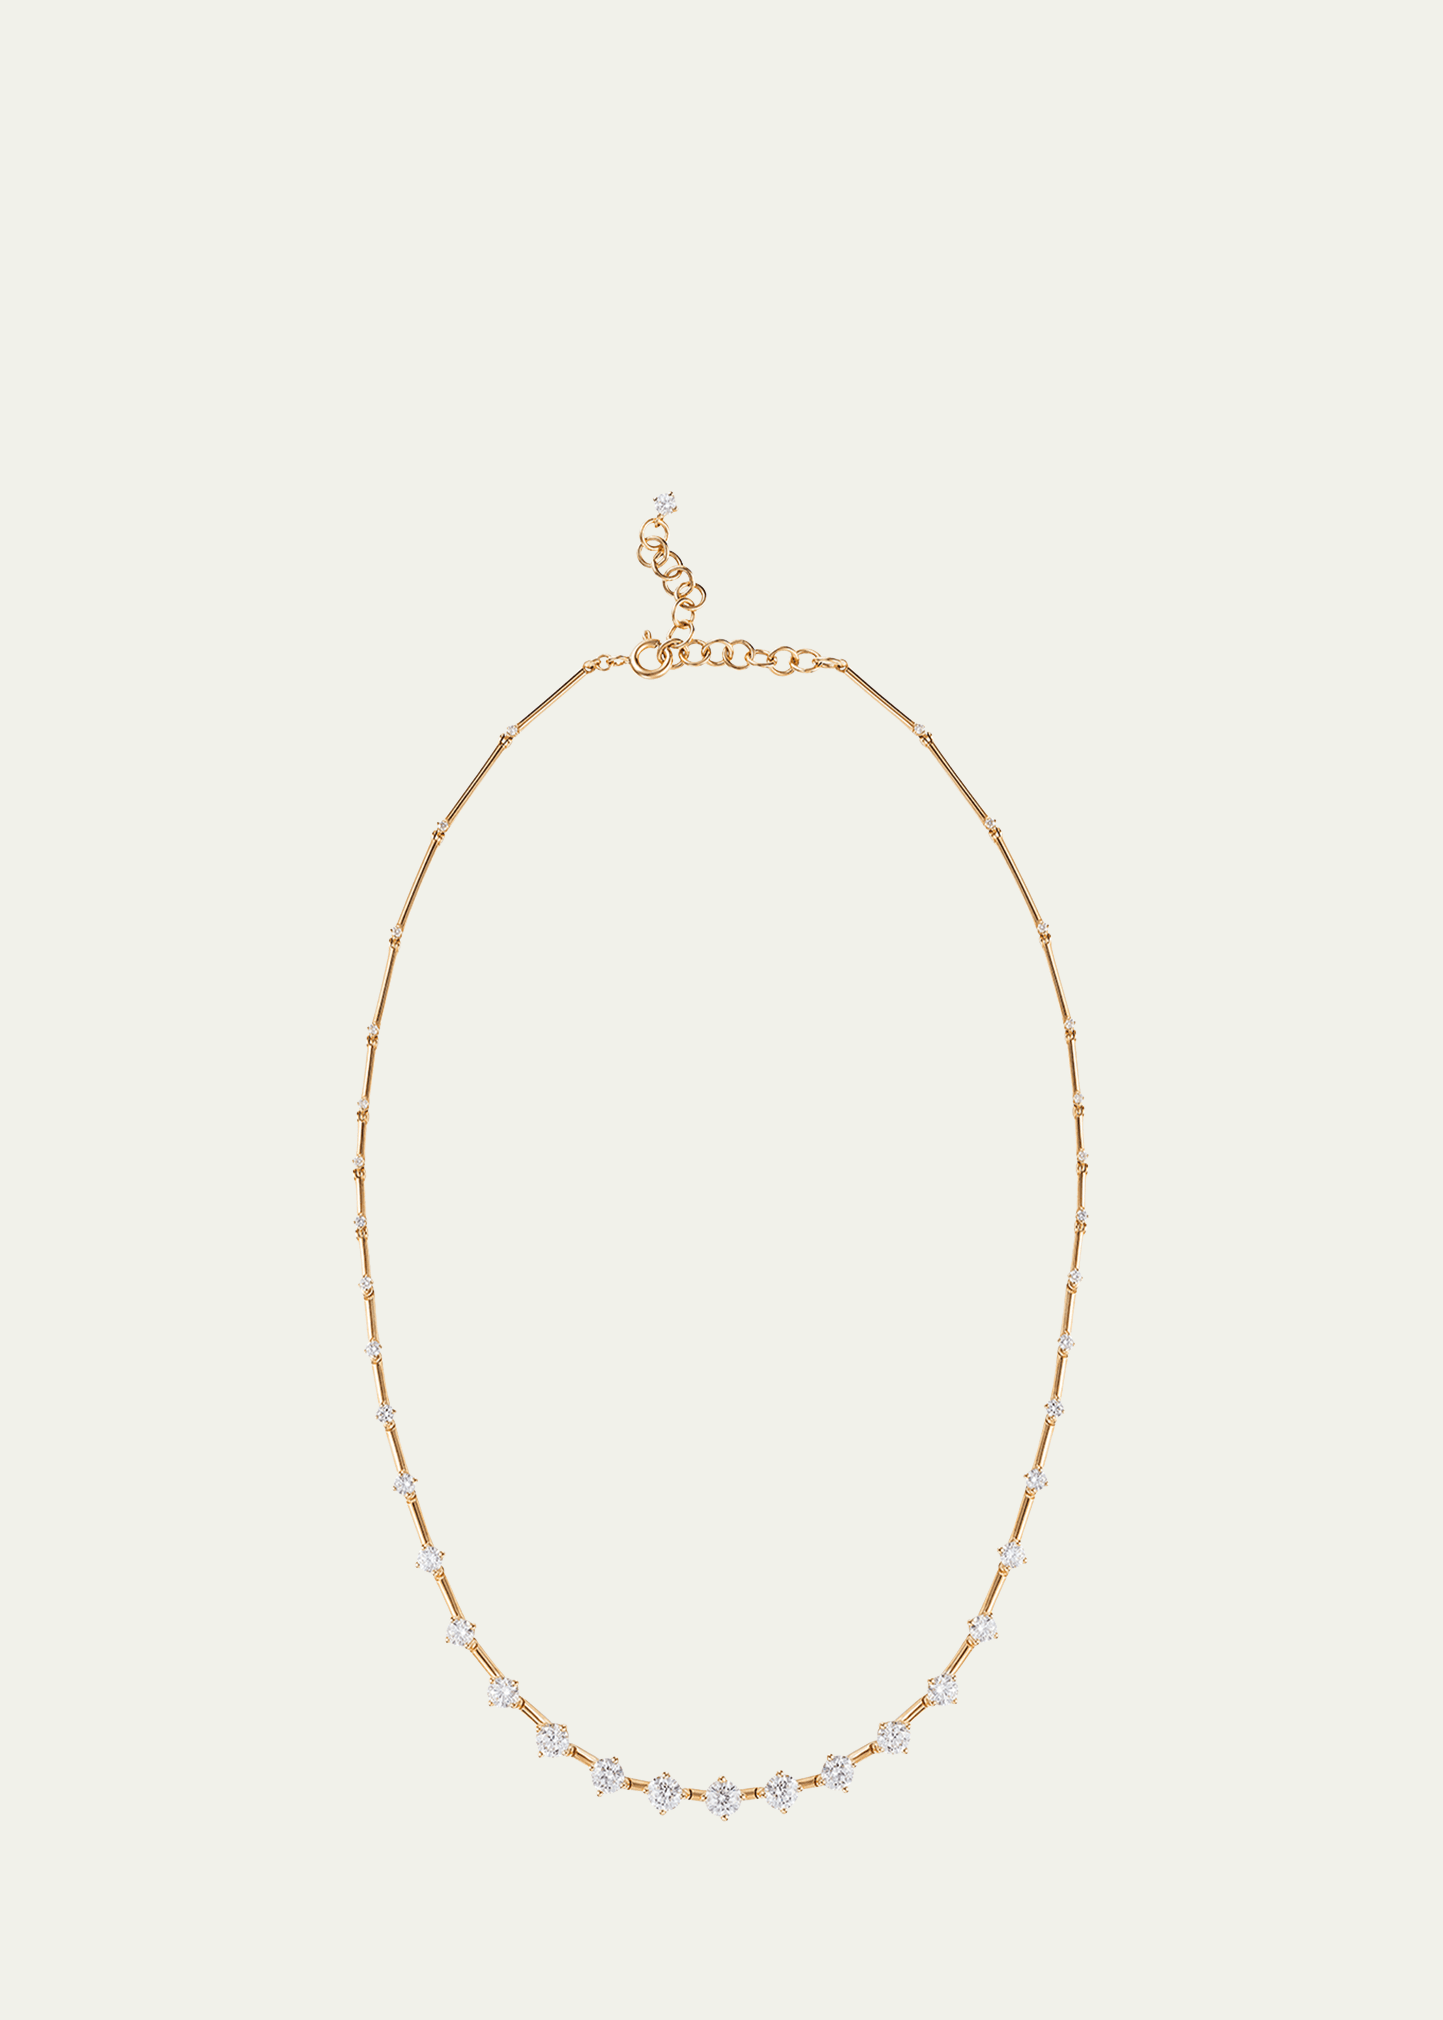 Sequence Necklace in Yellow Gold and Diamonds